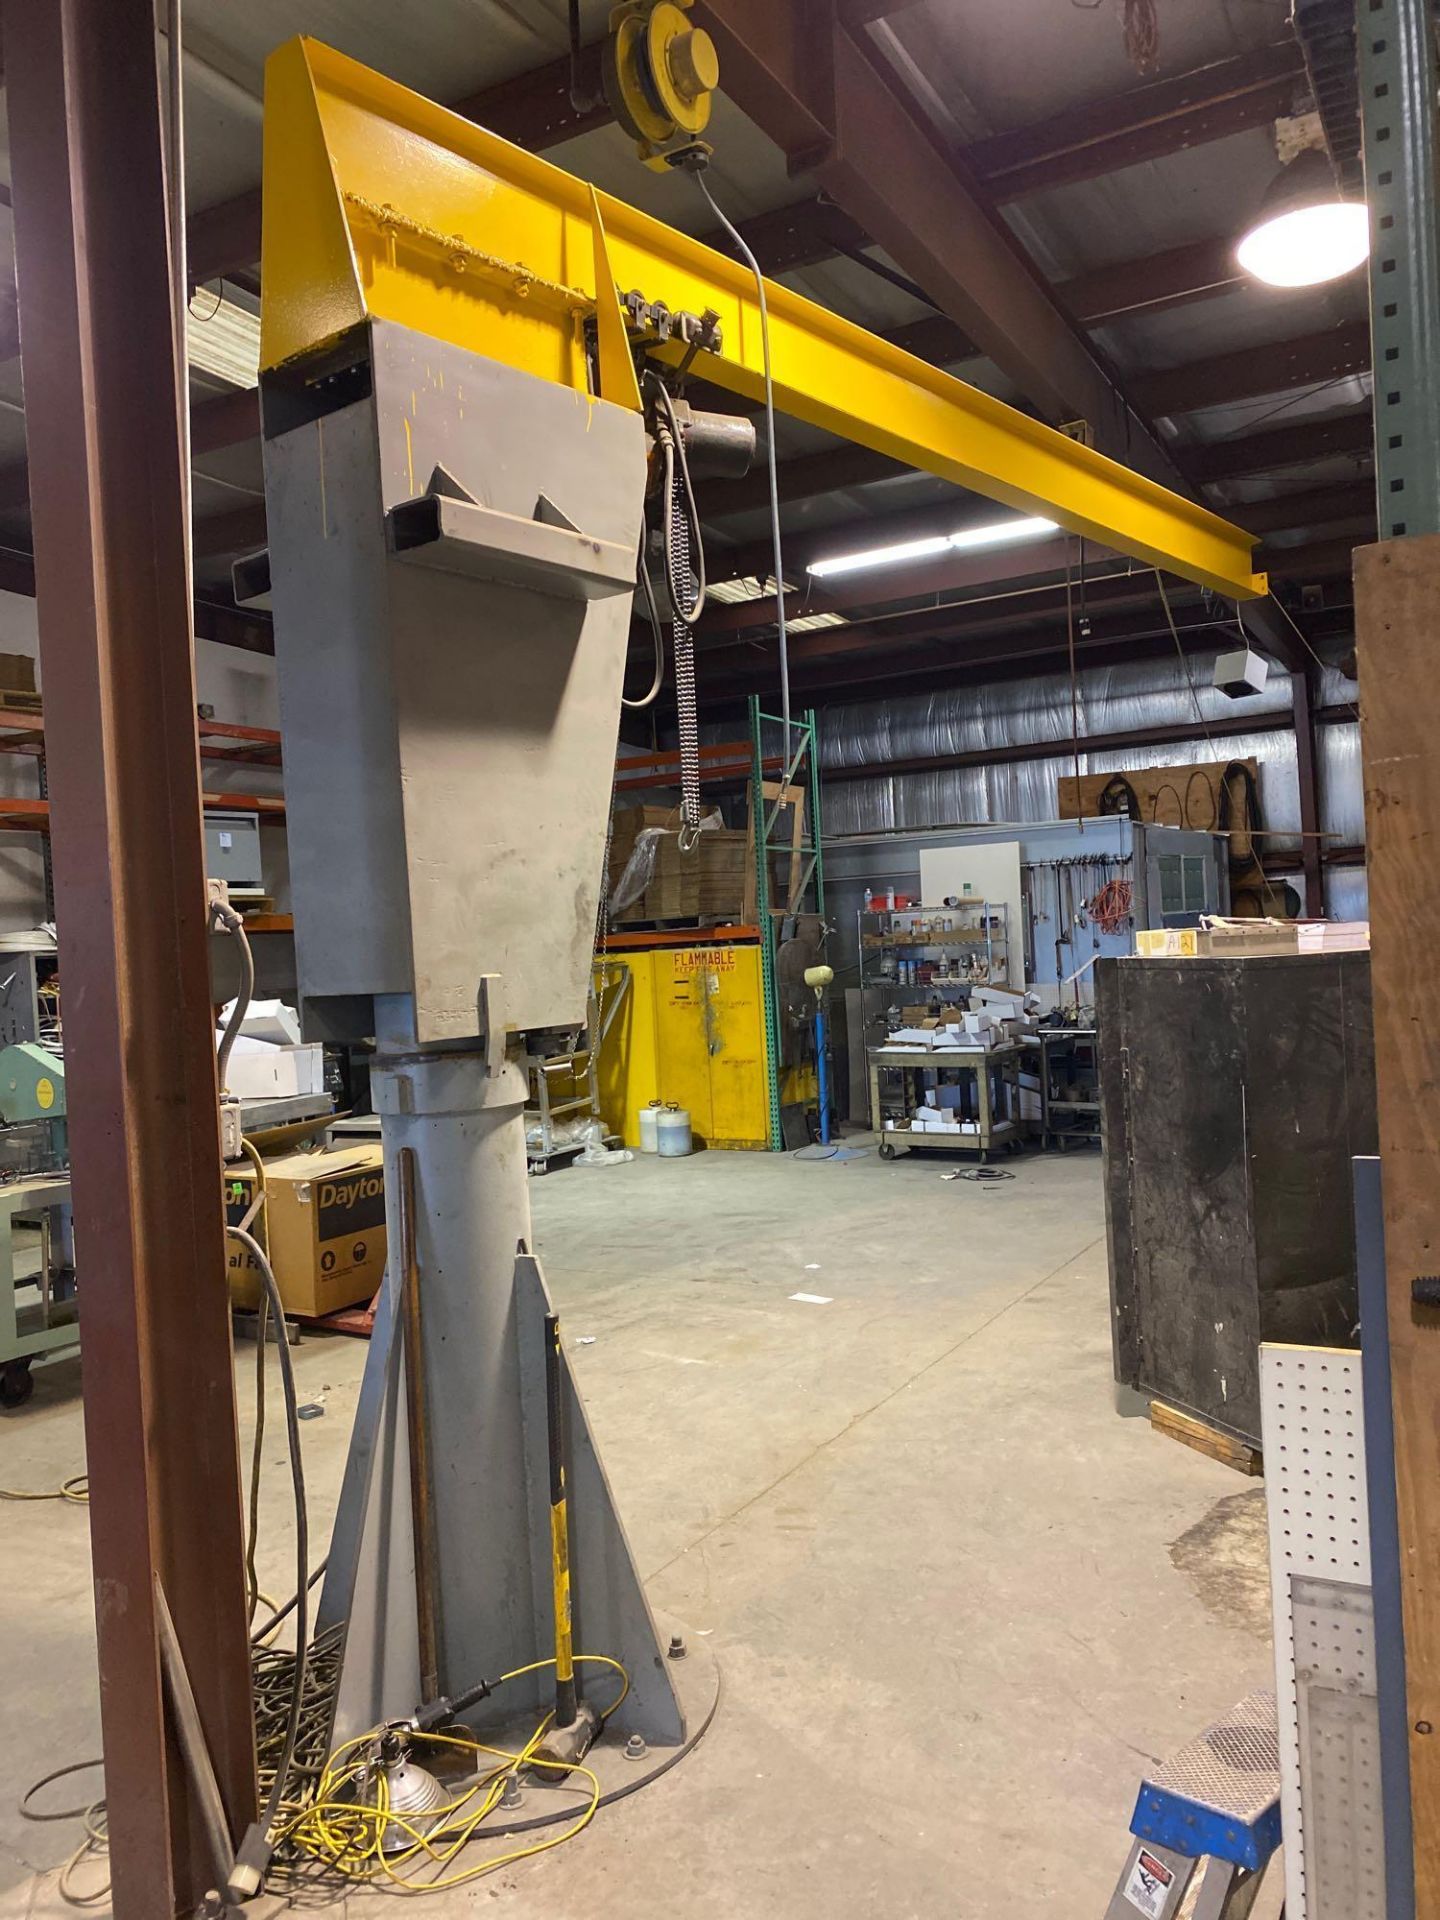 Over Head Jib Crane with Shannon Hoist and Yale Pulley System